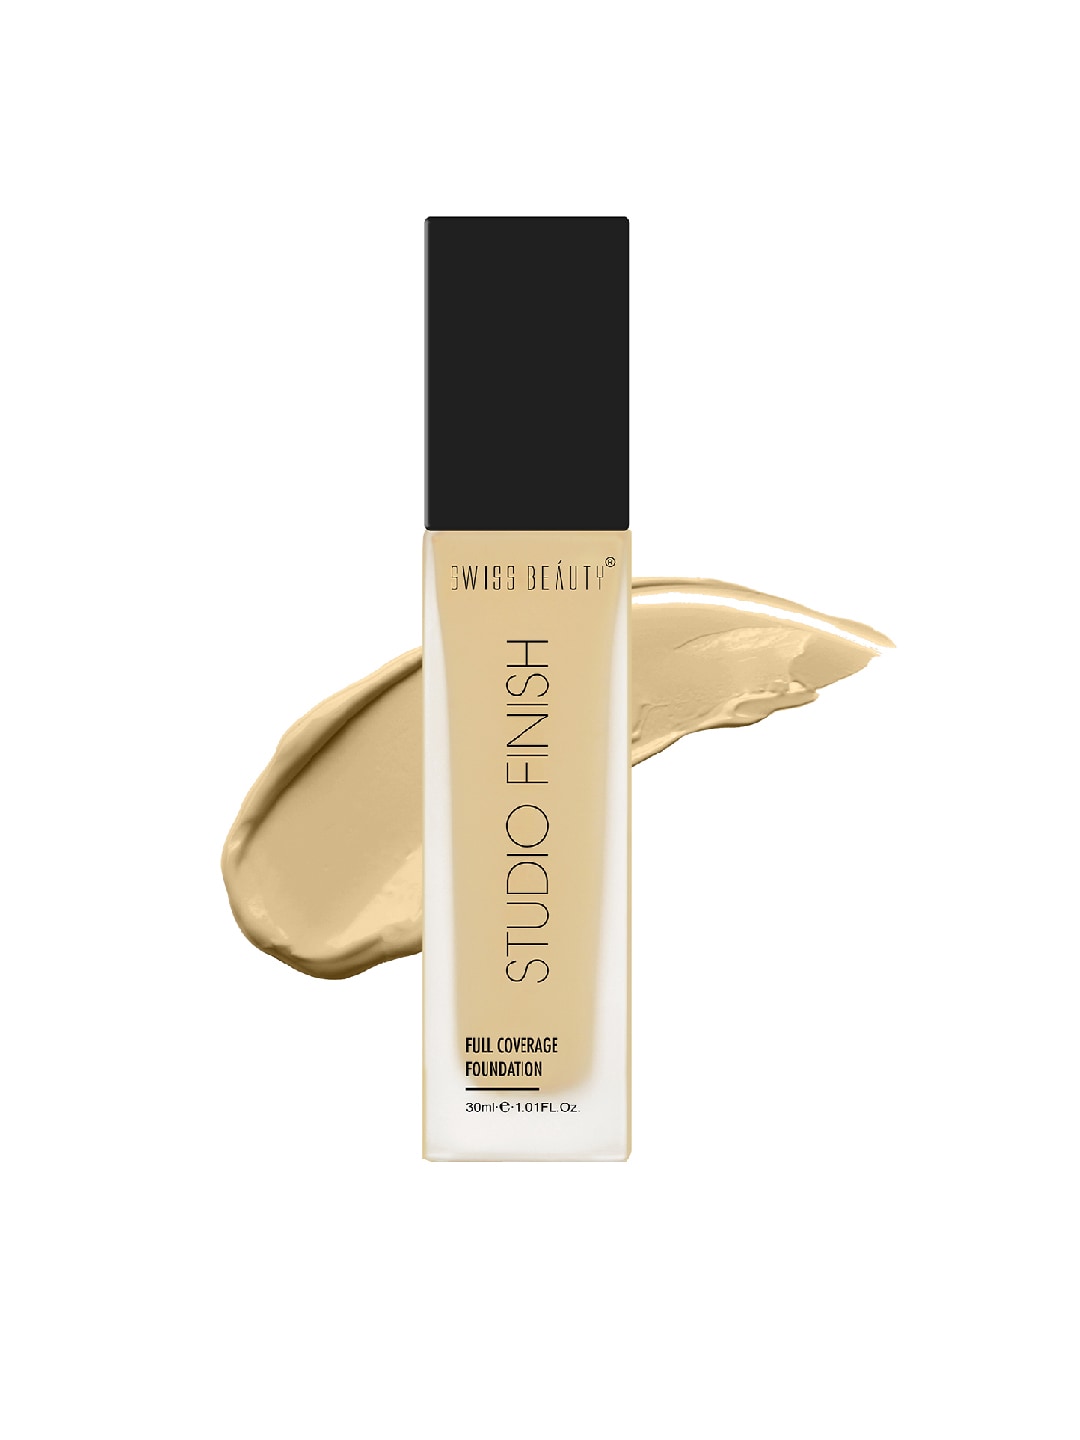 SWISS BEAUTY Studio Finish Full Coverage Foundation - Warm Nude Price in India